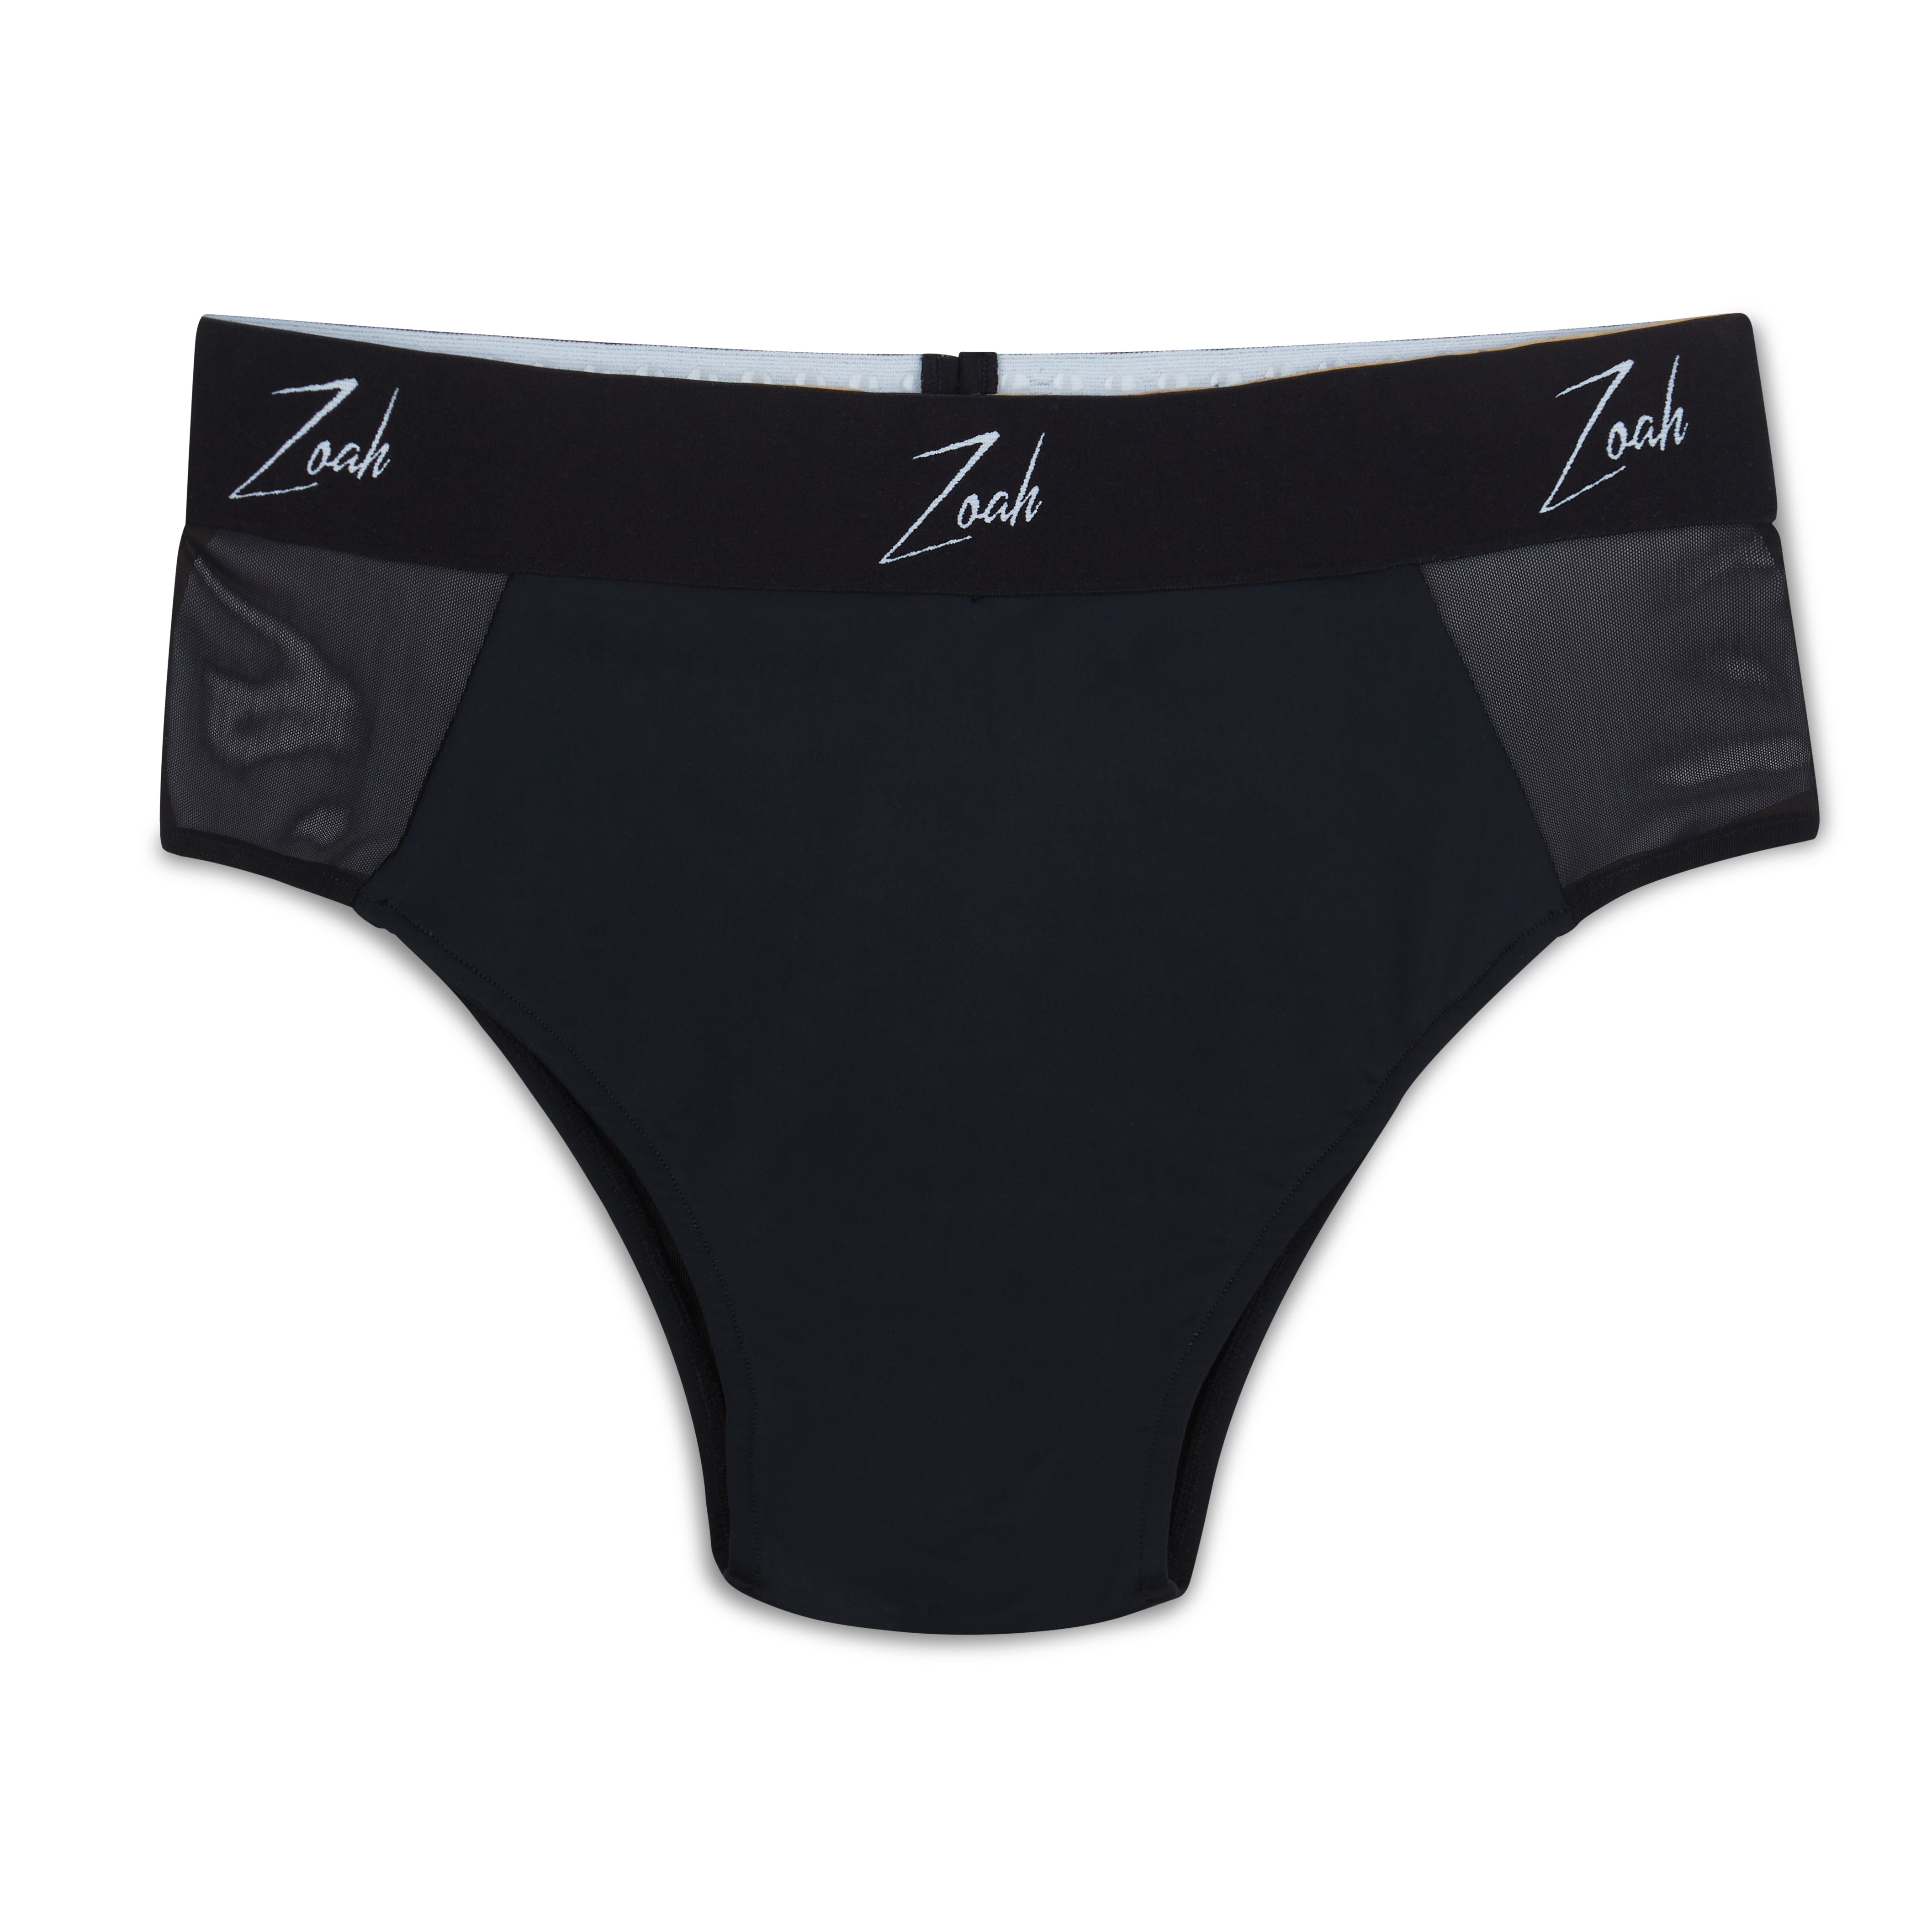 AERO - Underwear is our passion, but wait until you try what we